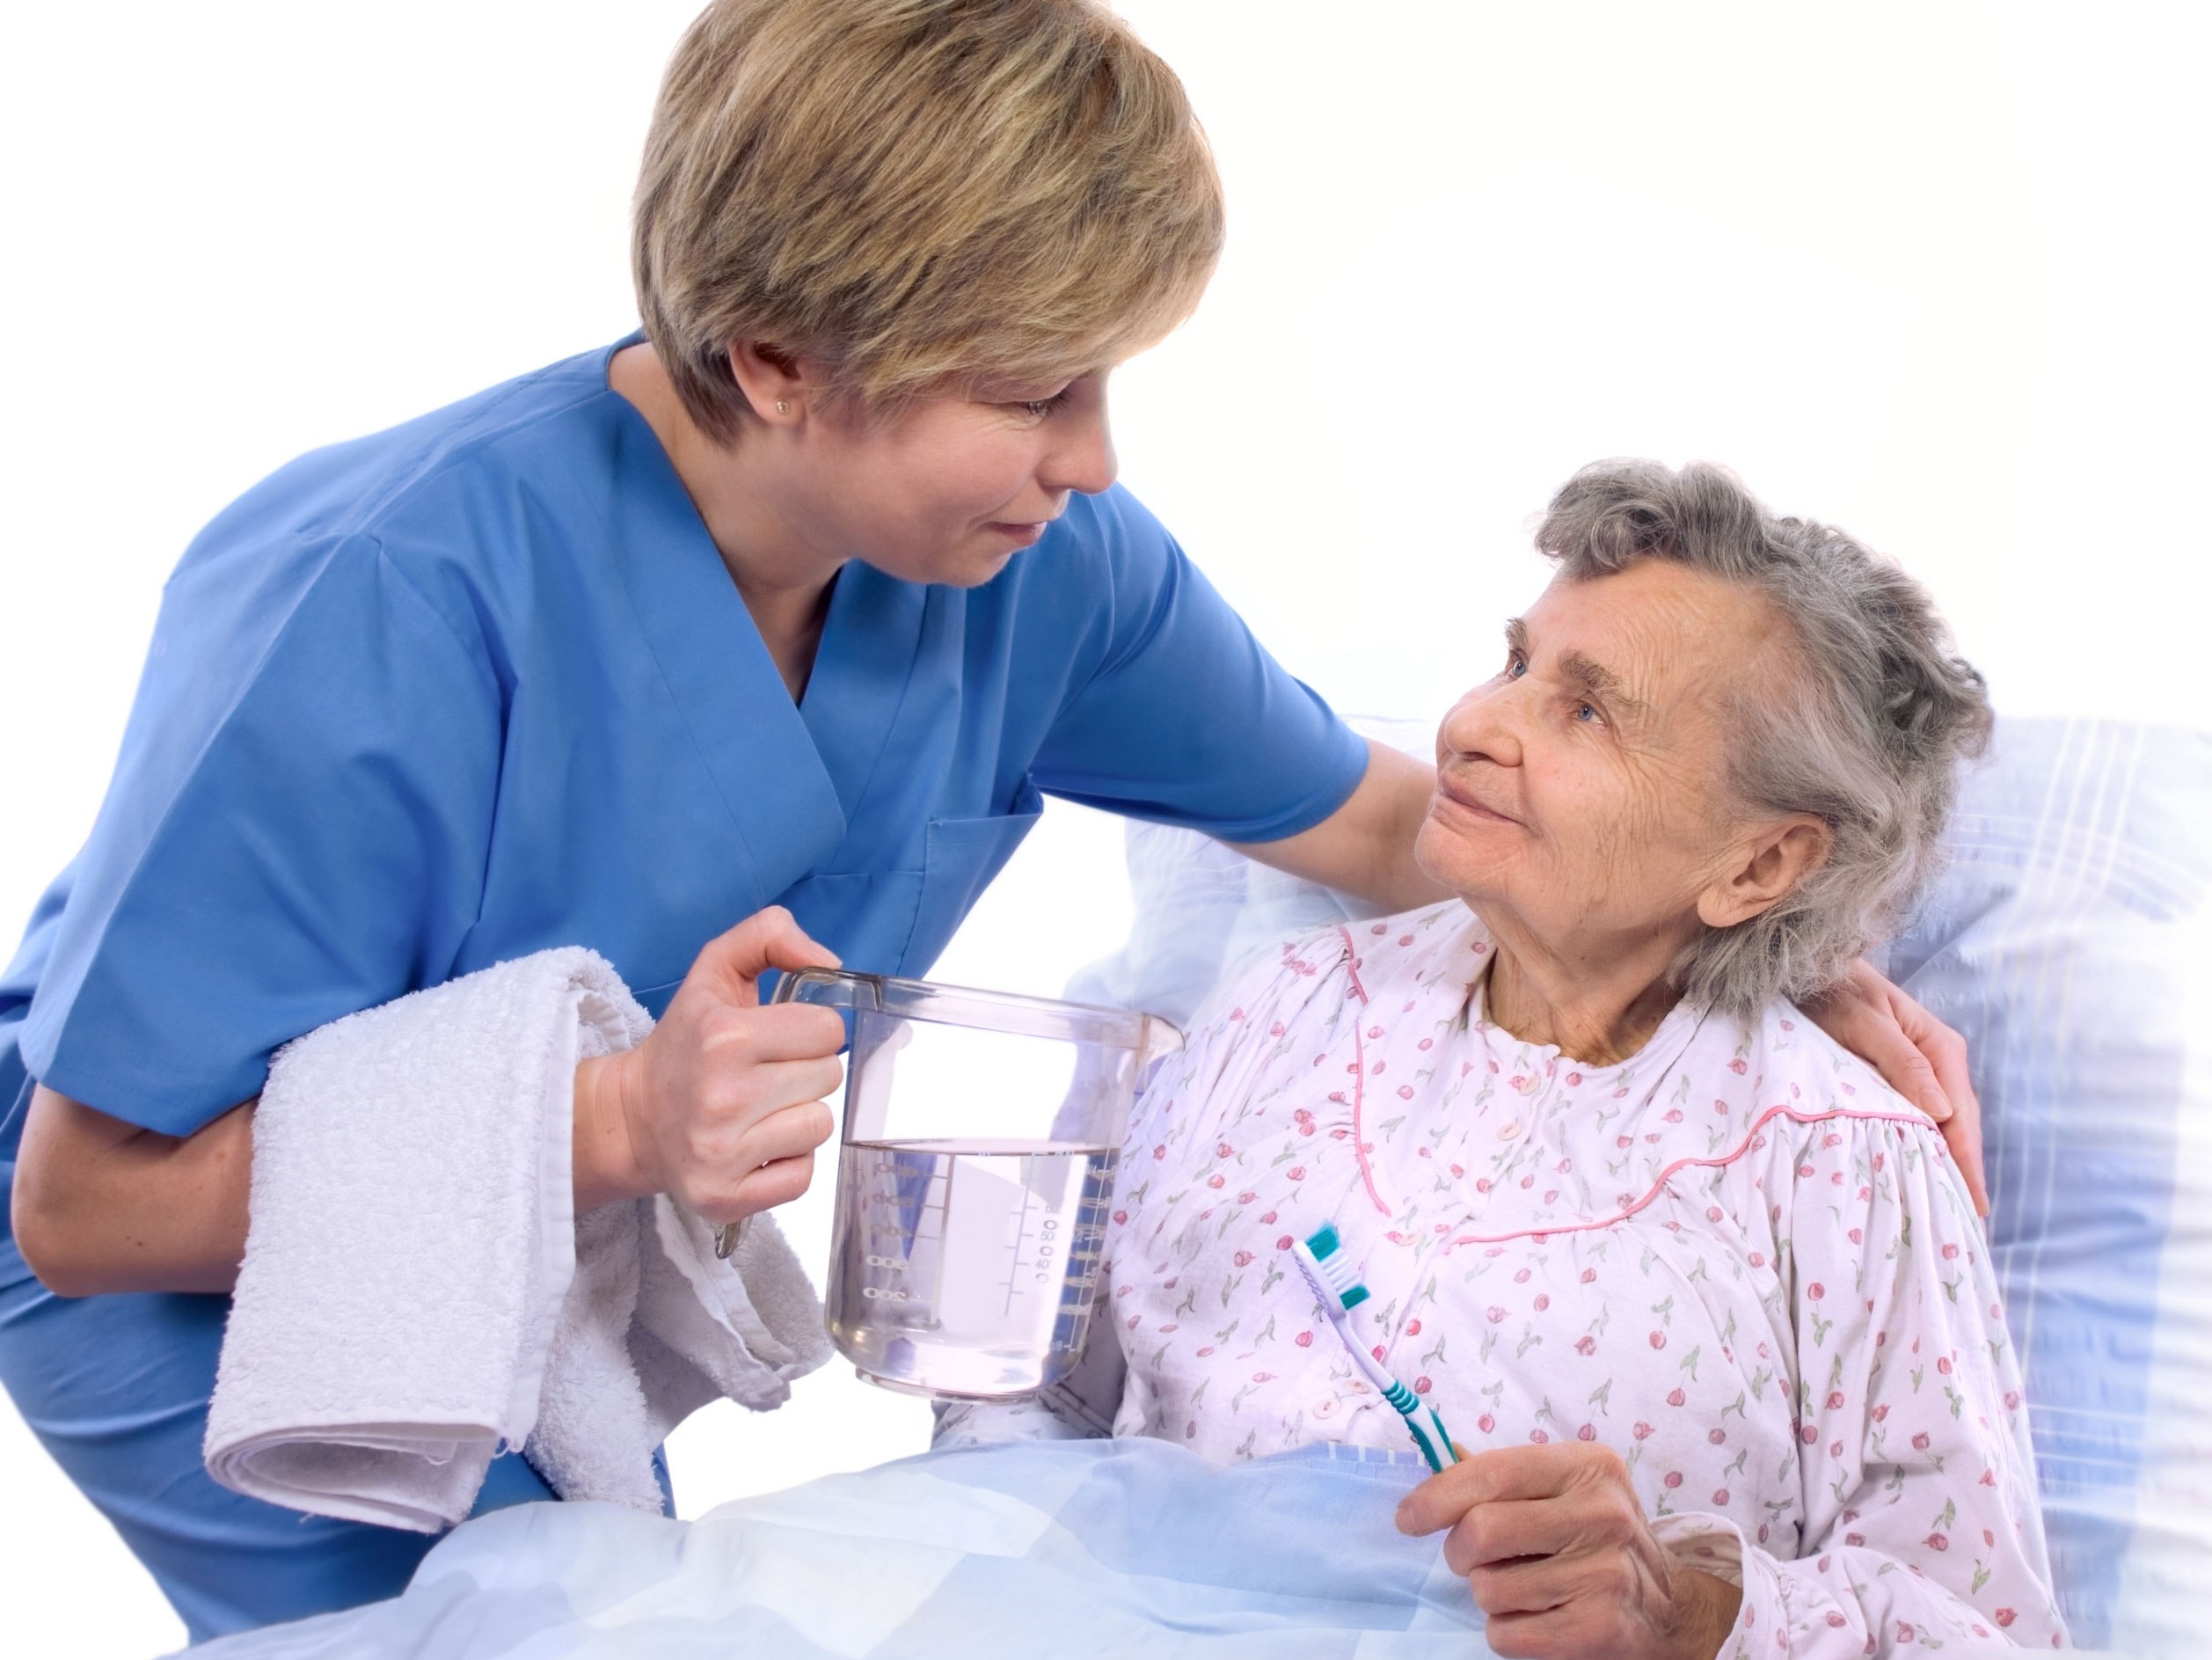 What To Look For While Hiring A Home Caregiver For The Elderly